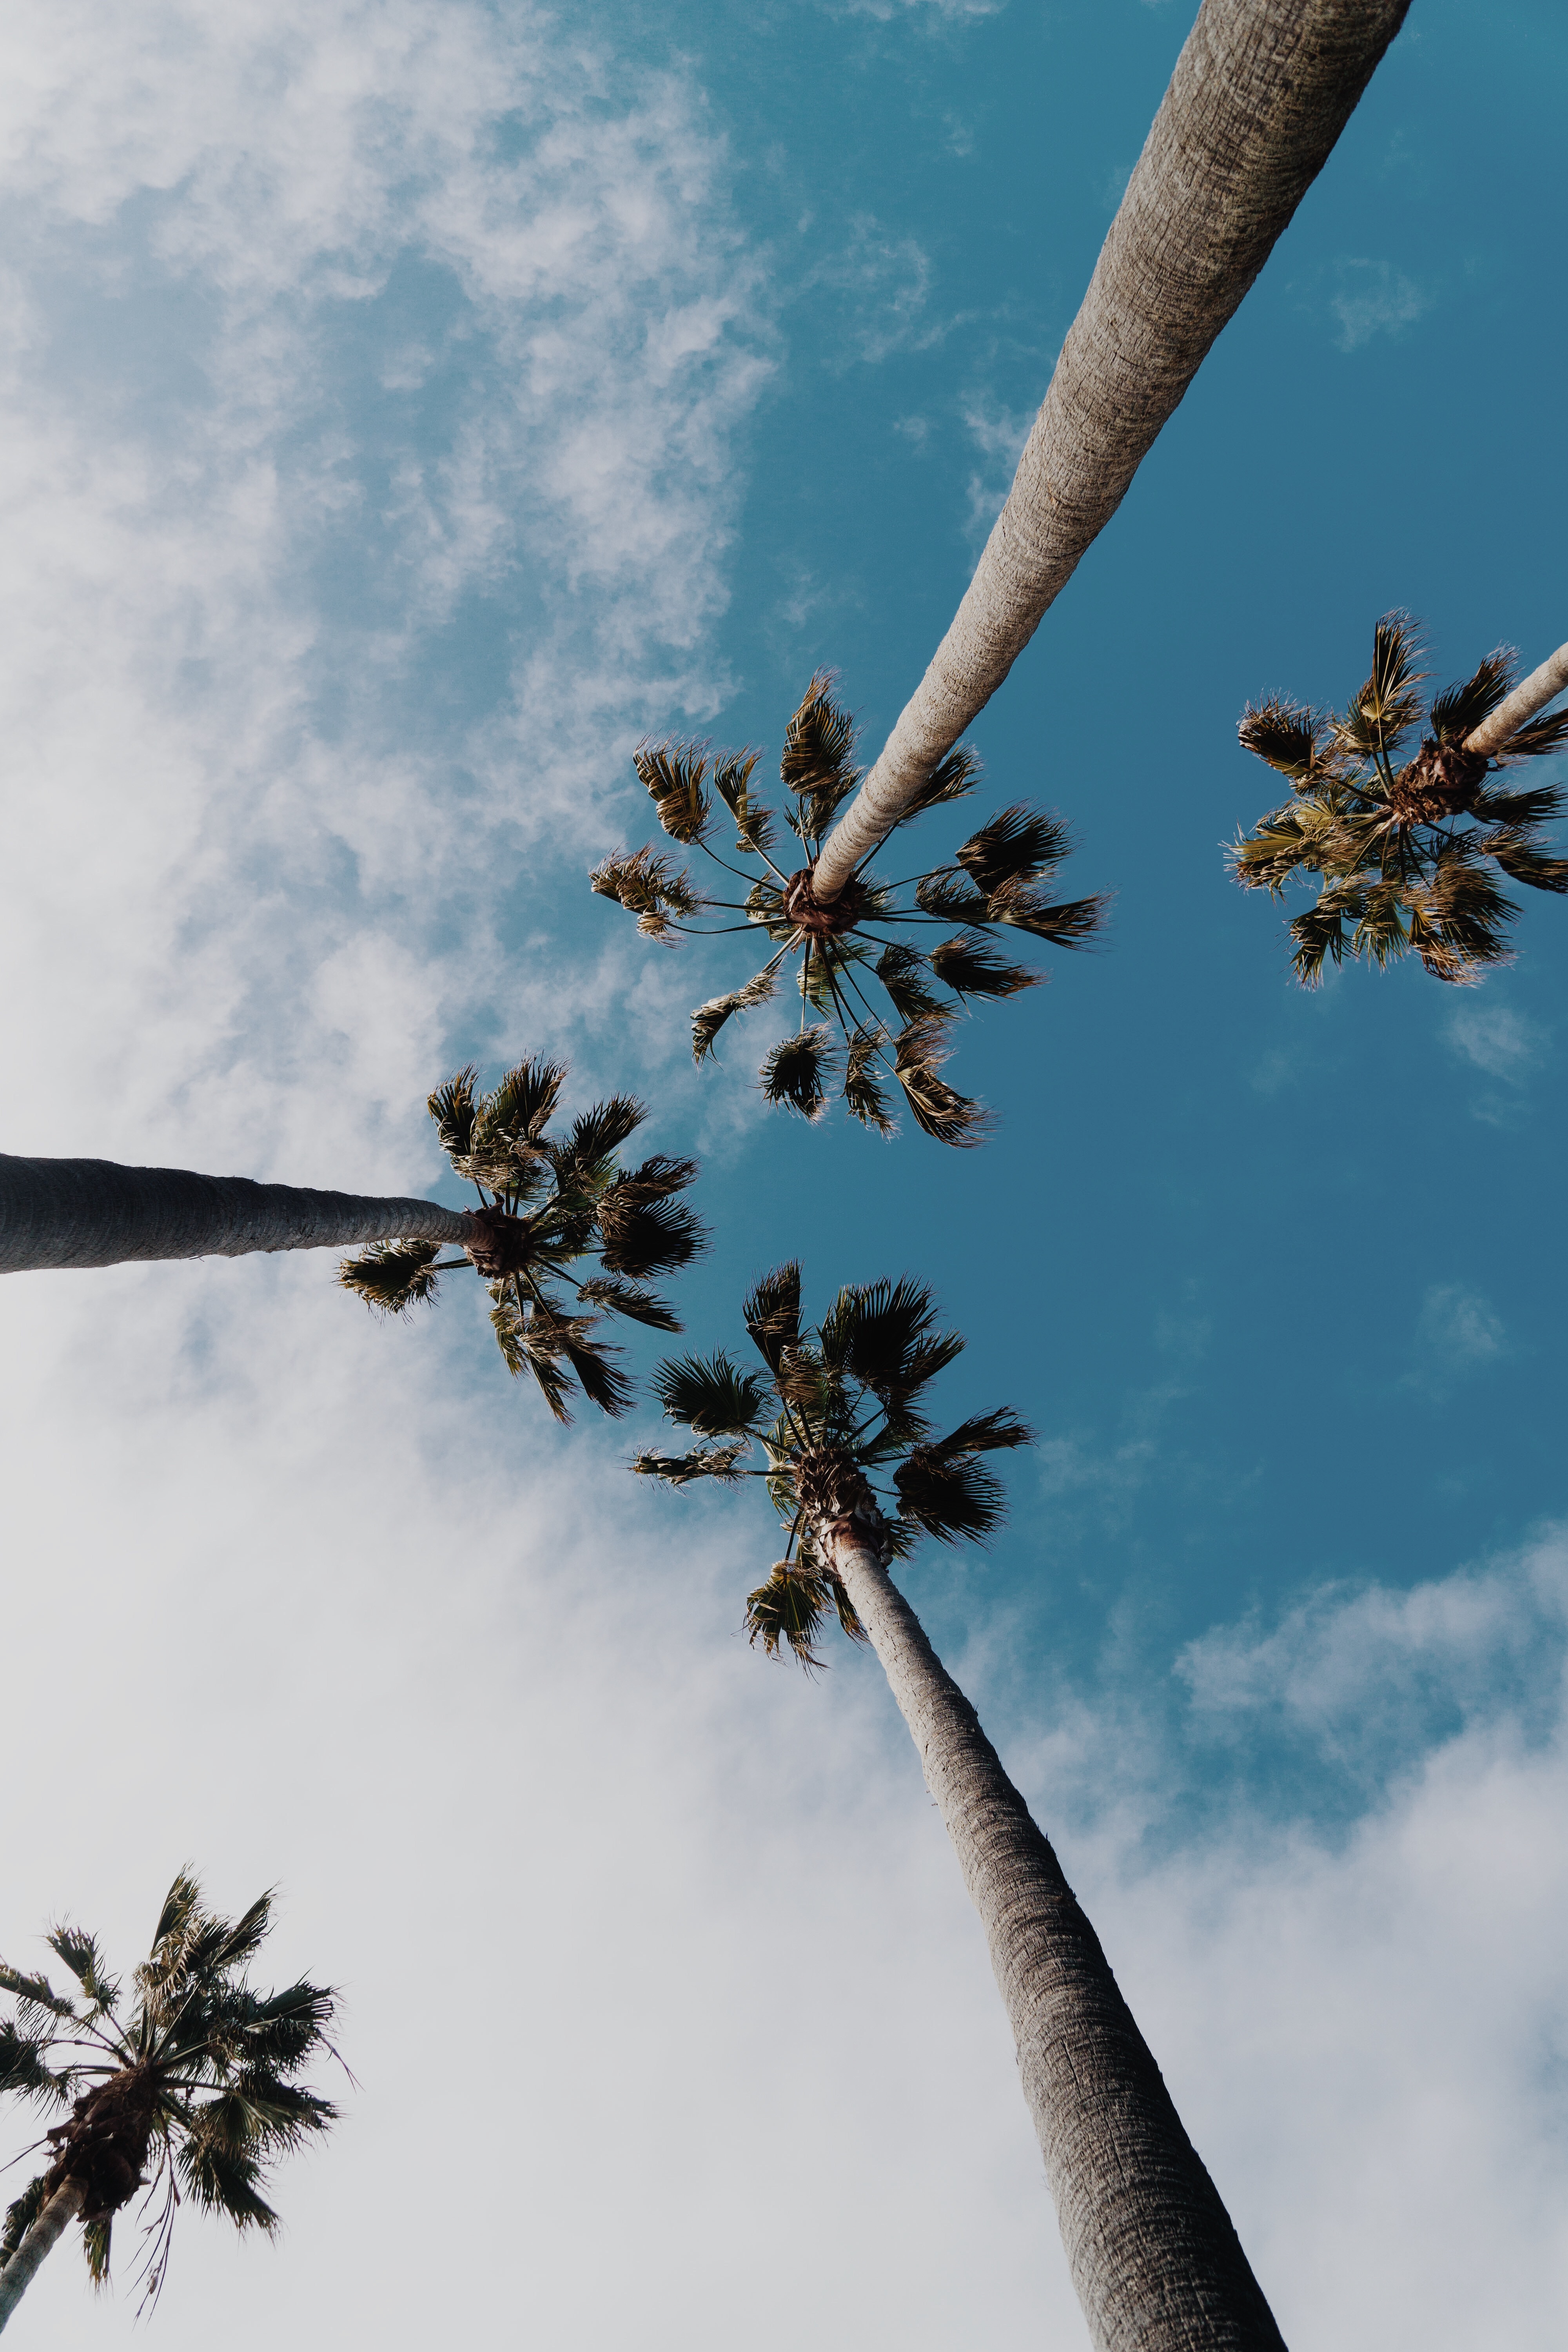 Image of some palms and the sky.